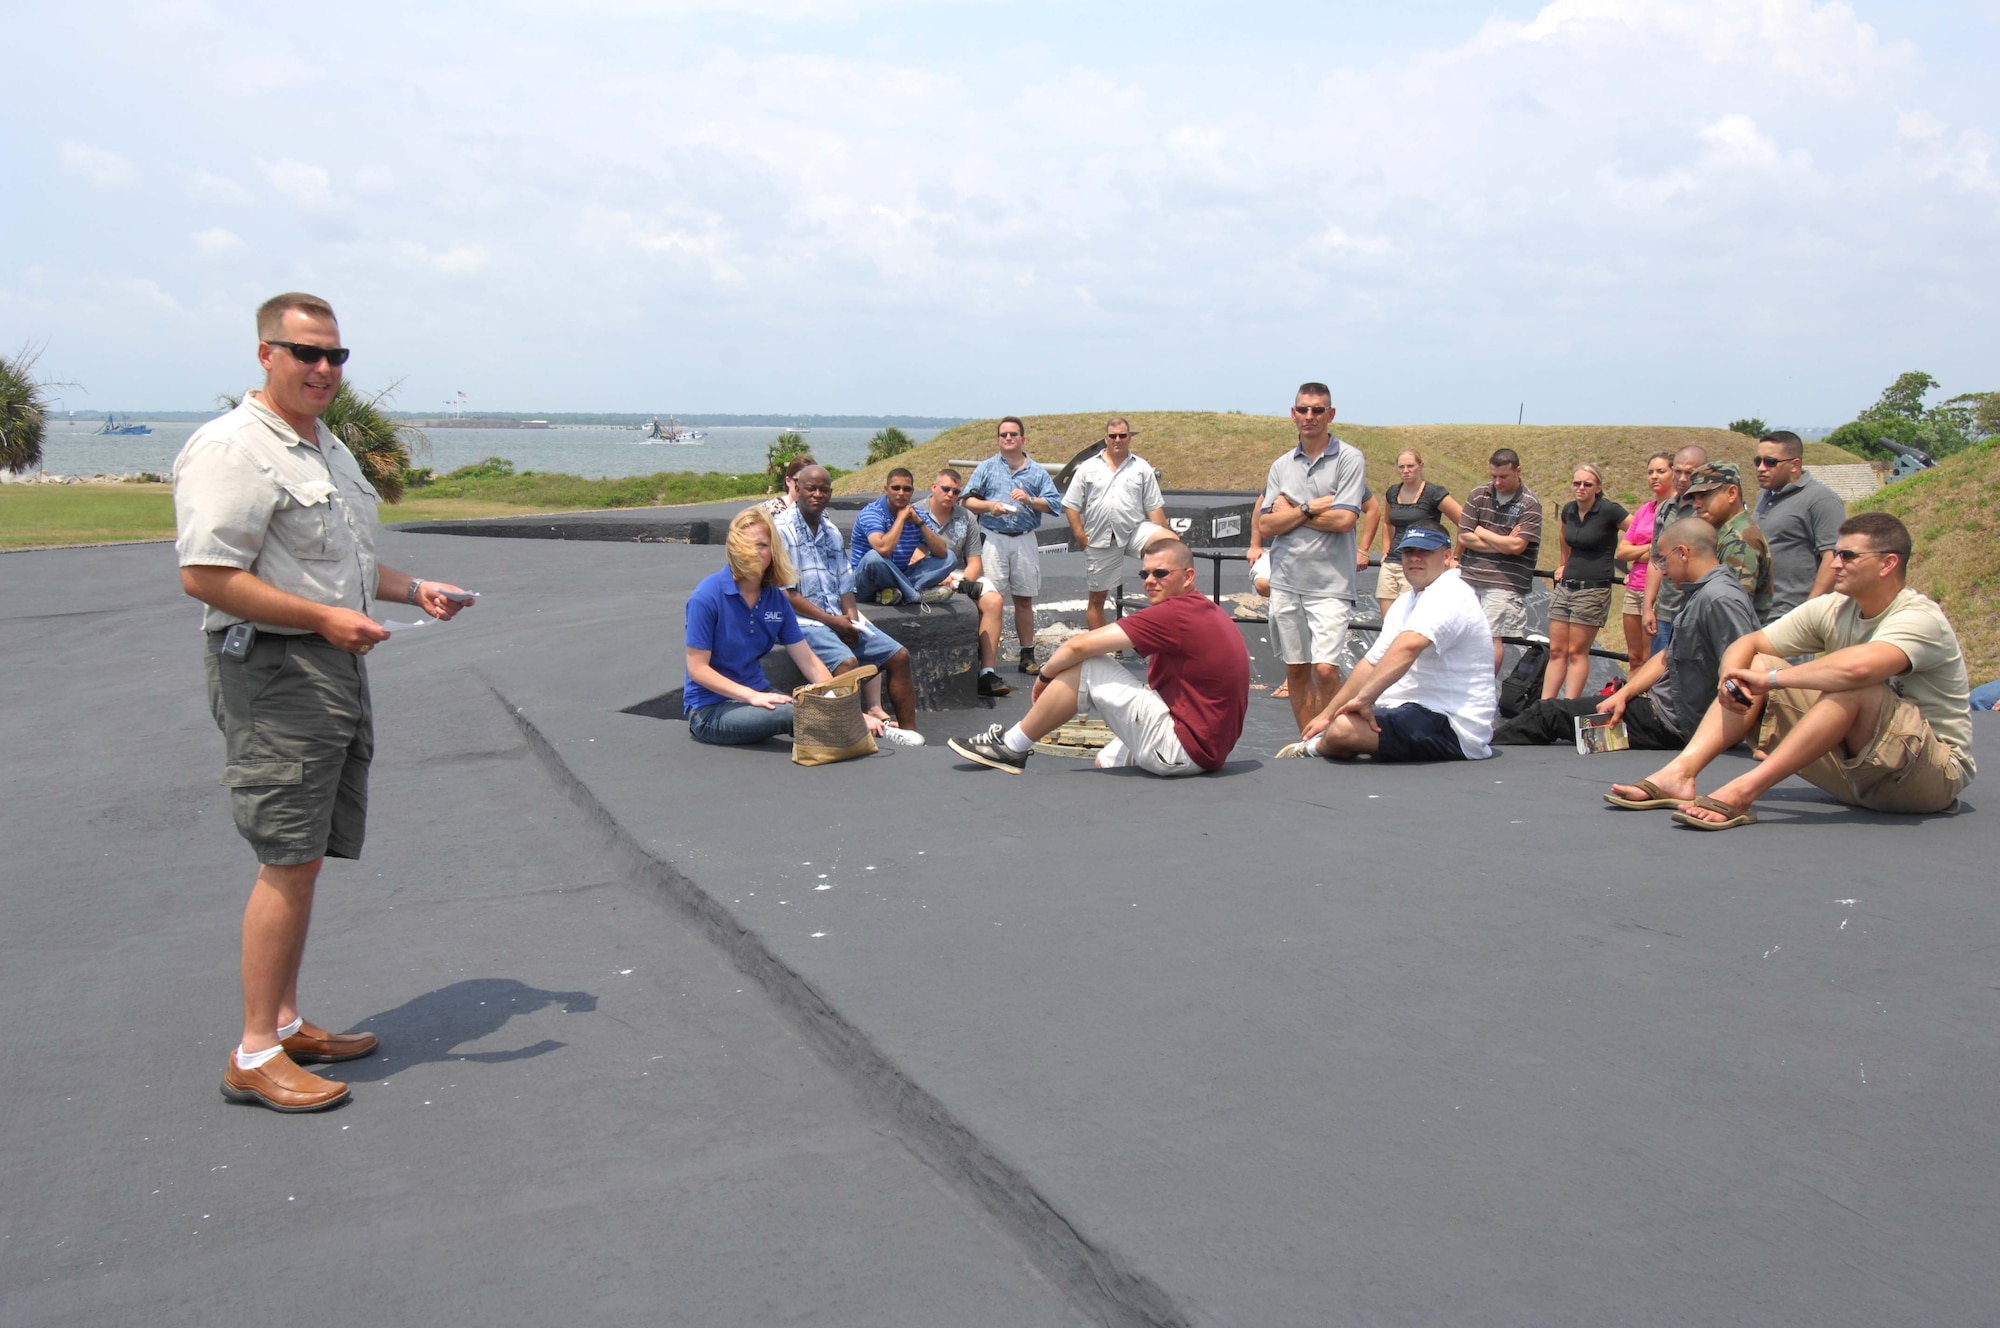 SULLIVAN'S ISLAND, S.C. - Army Major Dennis Malone, 4th Battlefield Coordination Detachment, briefs Airmen and Soldiers about operations at Fort Moultrie, a historic military instillation dating back to the Revolutionary War, during a Staff Ride June 20. The goal of the staff ride is to provide a level of knowledge about the battle and to apply the lessons learned from that battle to today's operating environment in the global war on terrorism. (U.S. Air Force photo/Senior Airman William Coleman)